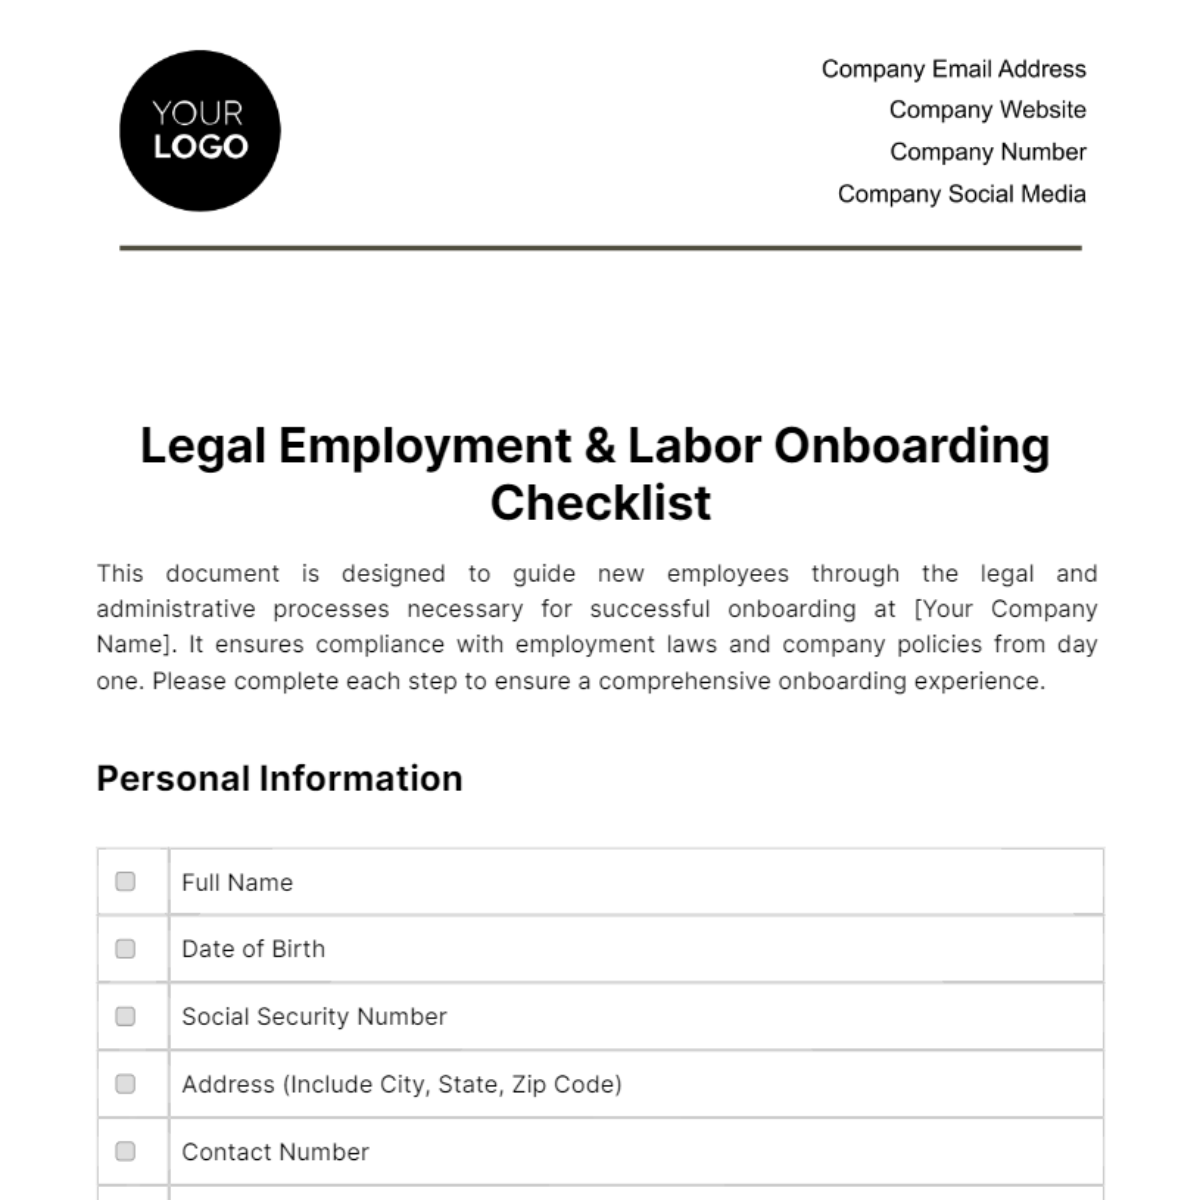 Legal Employment & Labor Onboarding Checklist Template